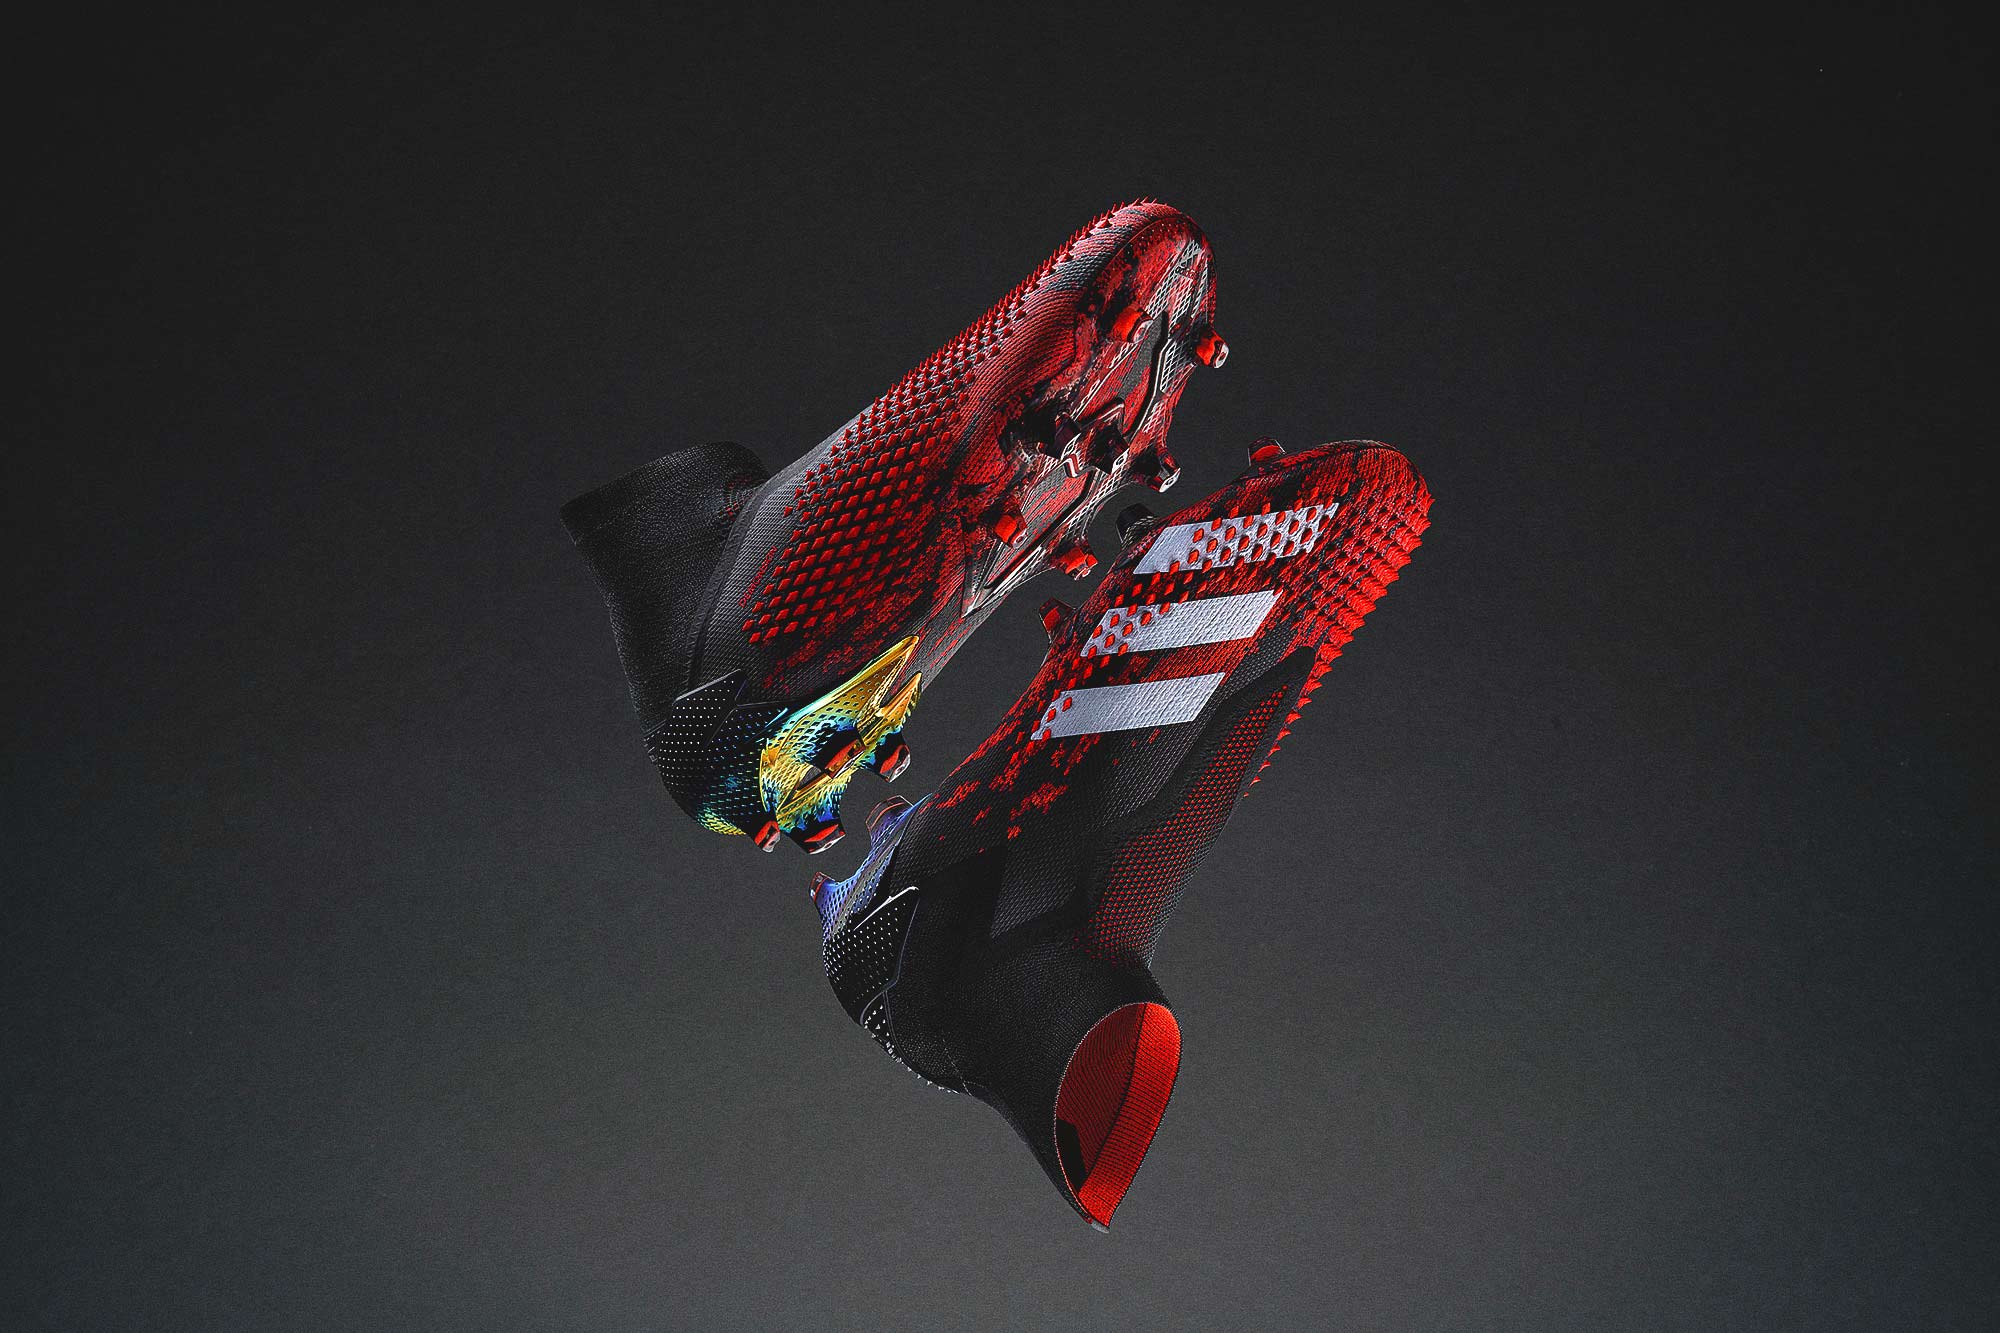 Close-up view of the latest Adidas Predator 2.0 Football Boot, showcasing its sleek design and advanced features, captured in a commercial product photography shoot for Adidas."